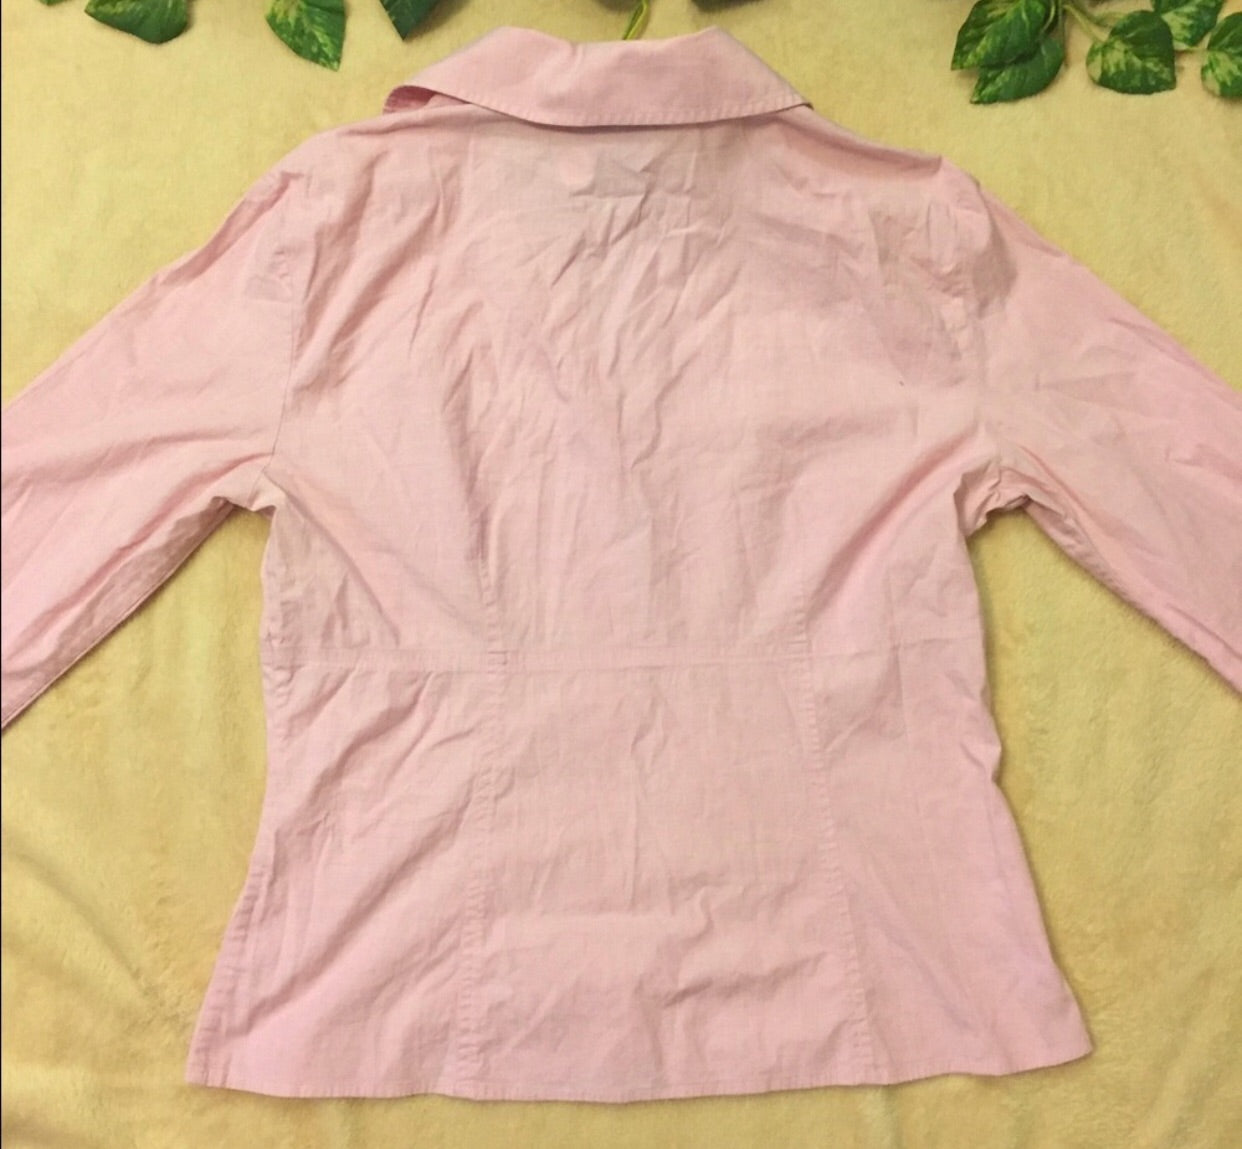 Ann Taylor Oxford Button Up Blouse, US Size Medium - Gently Used